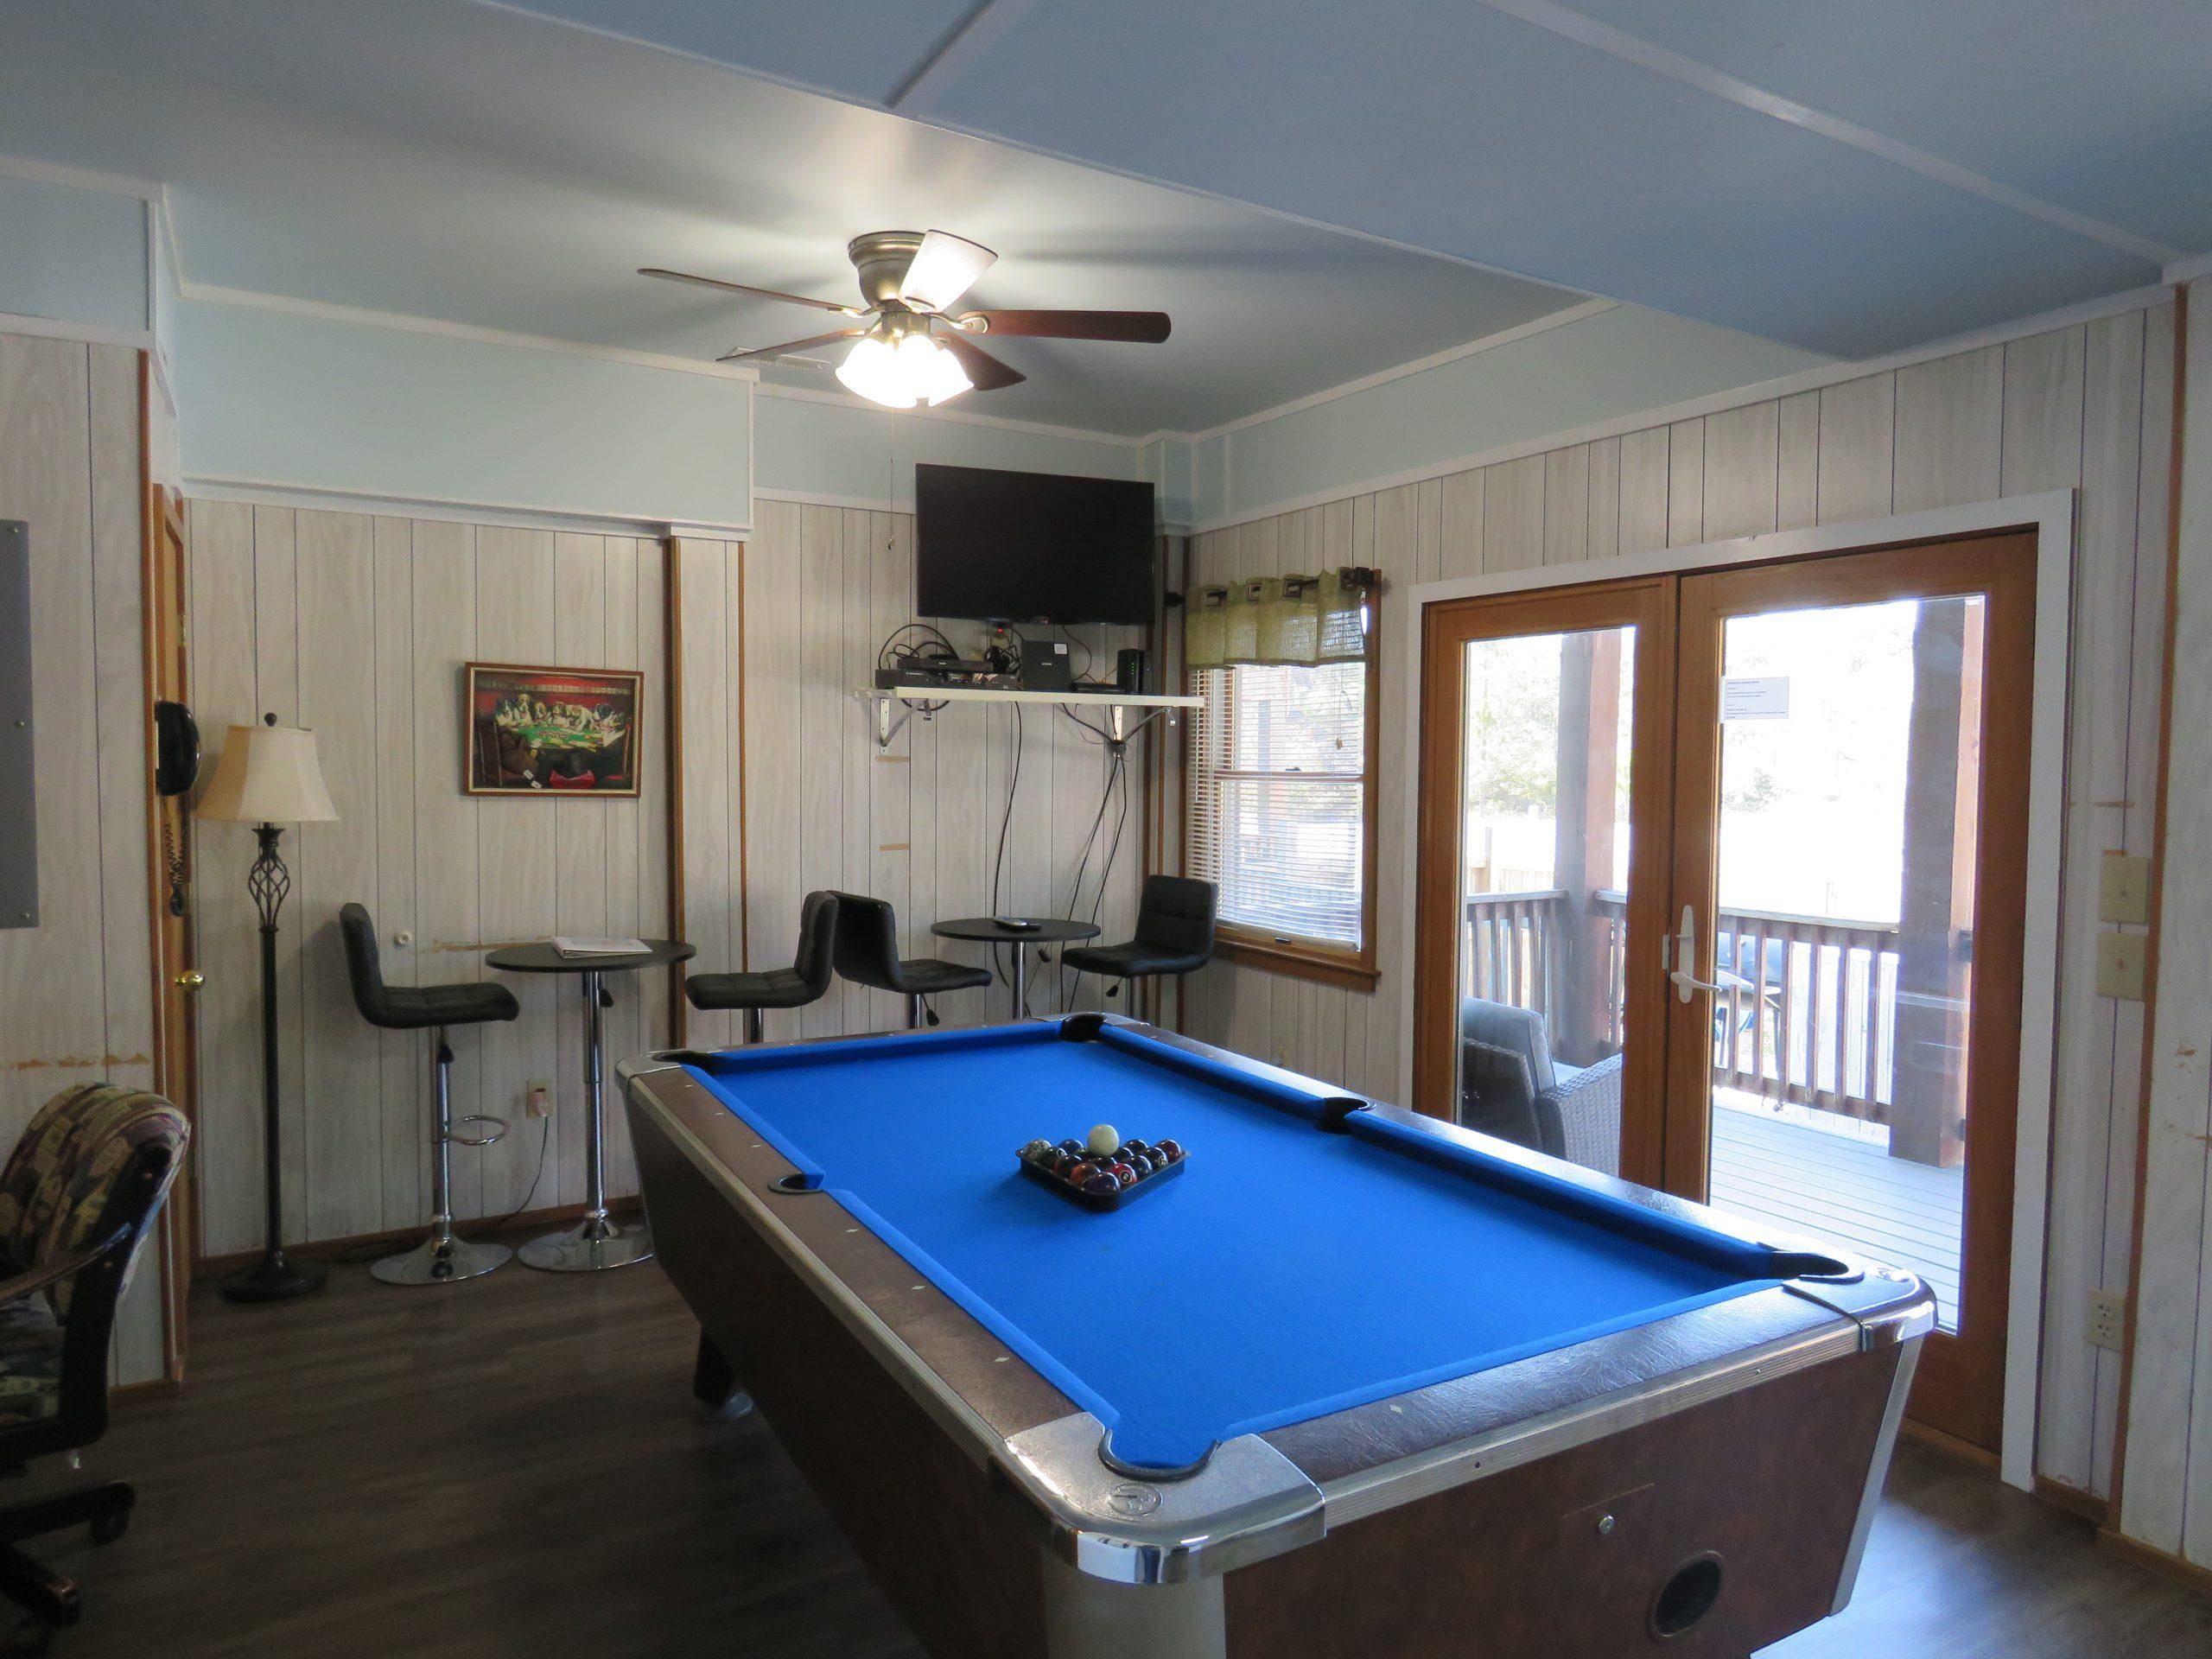 Pool table and gaming area